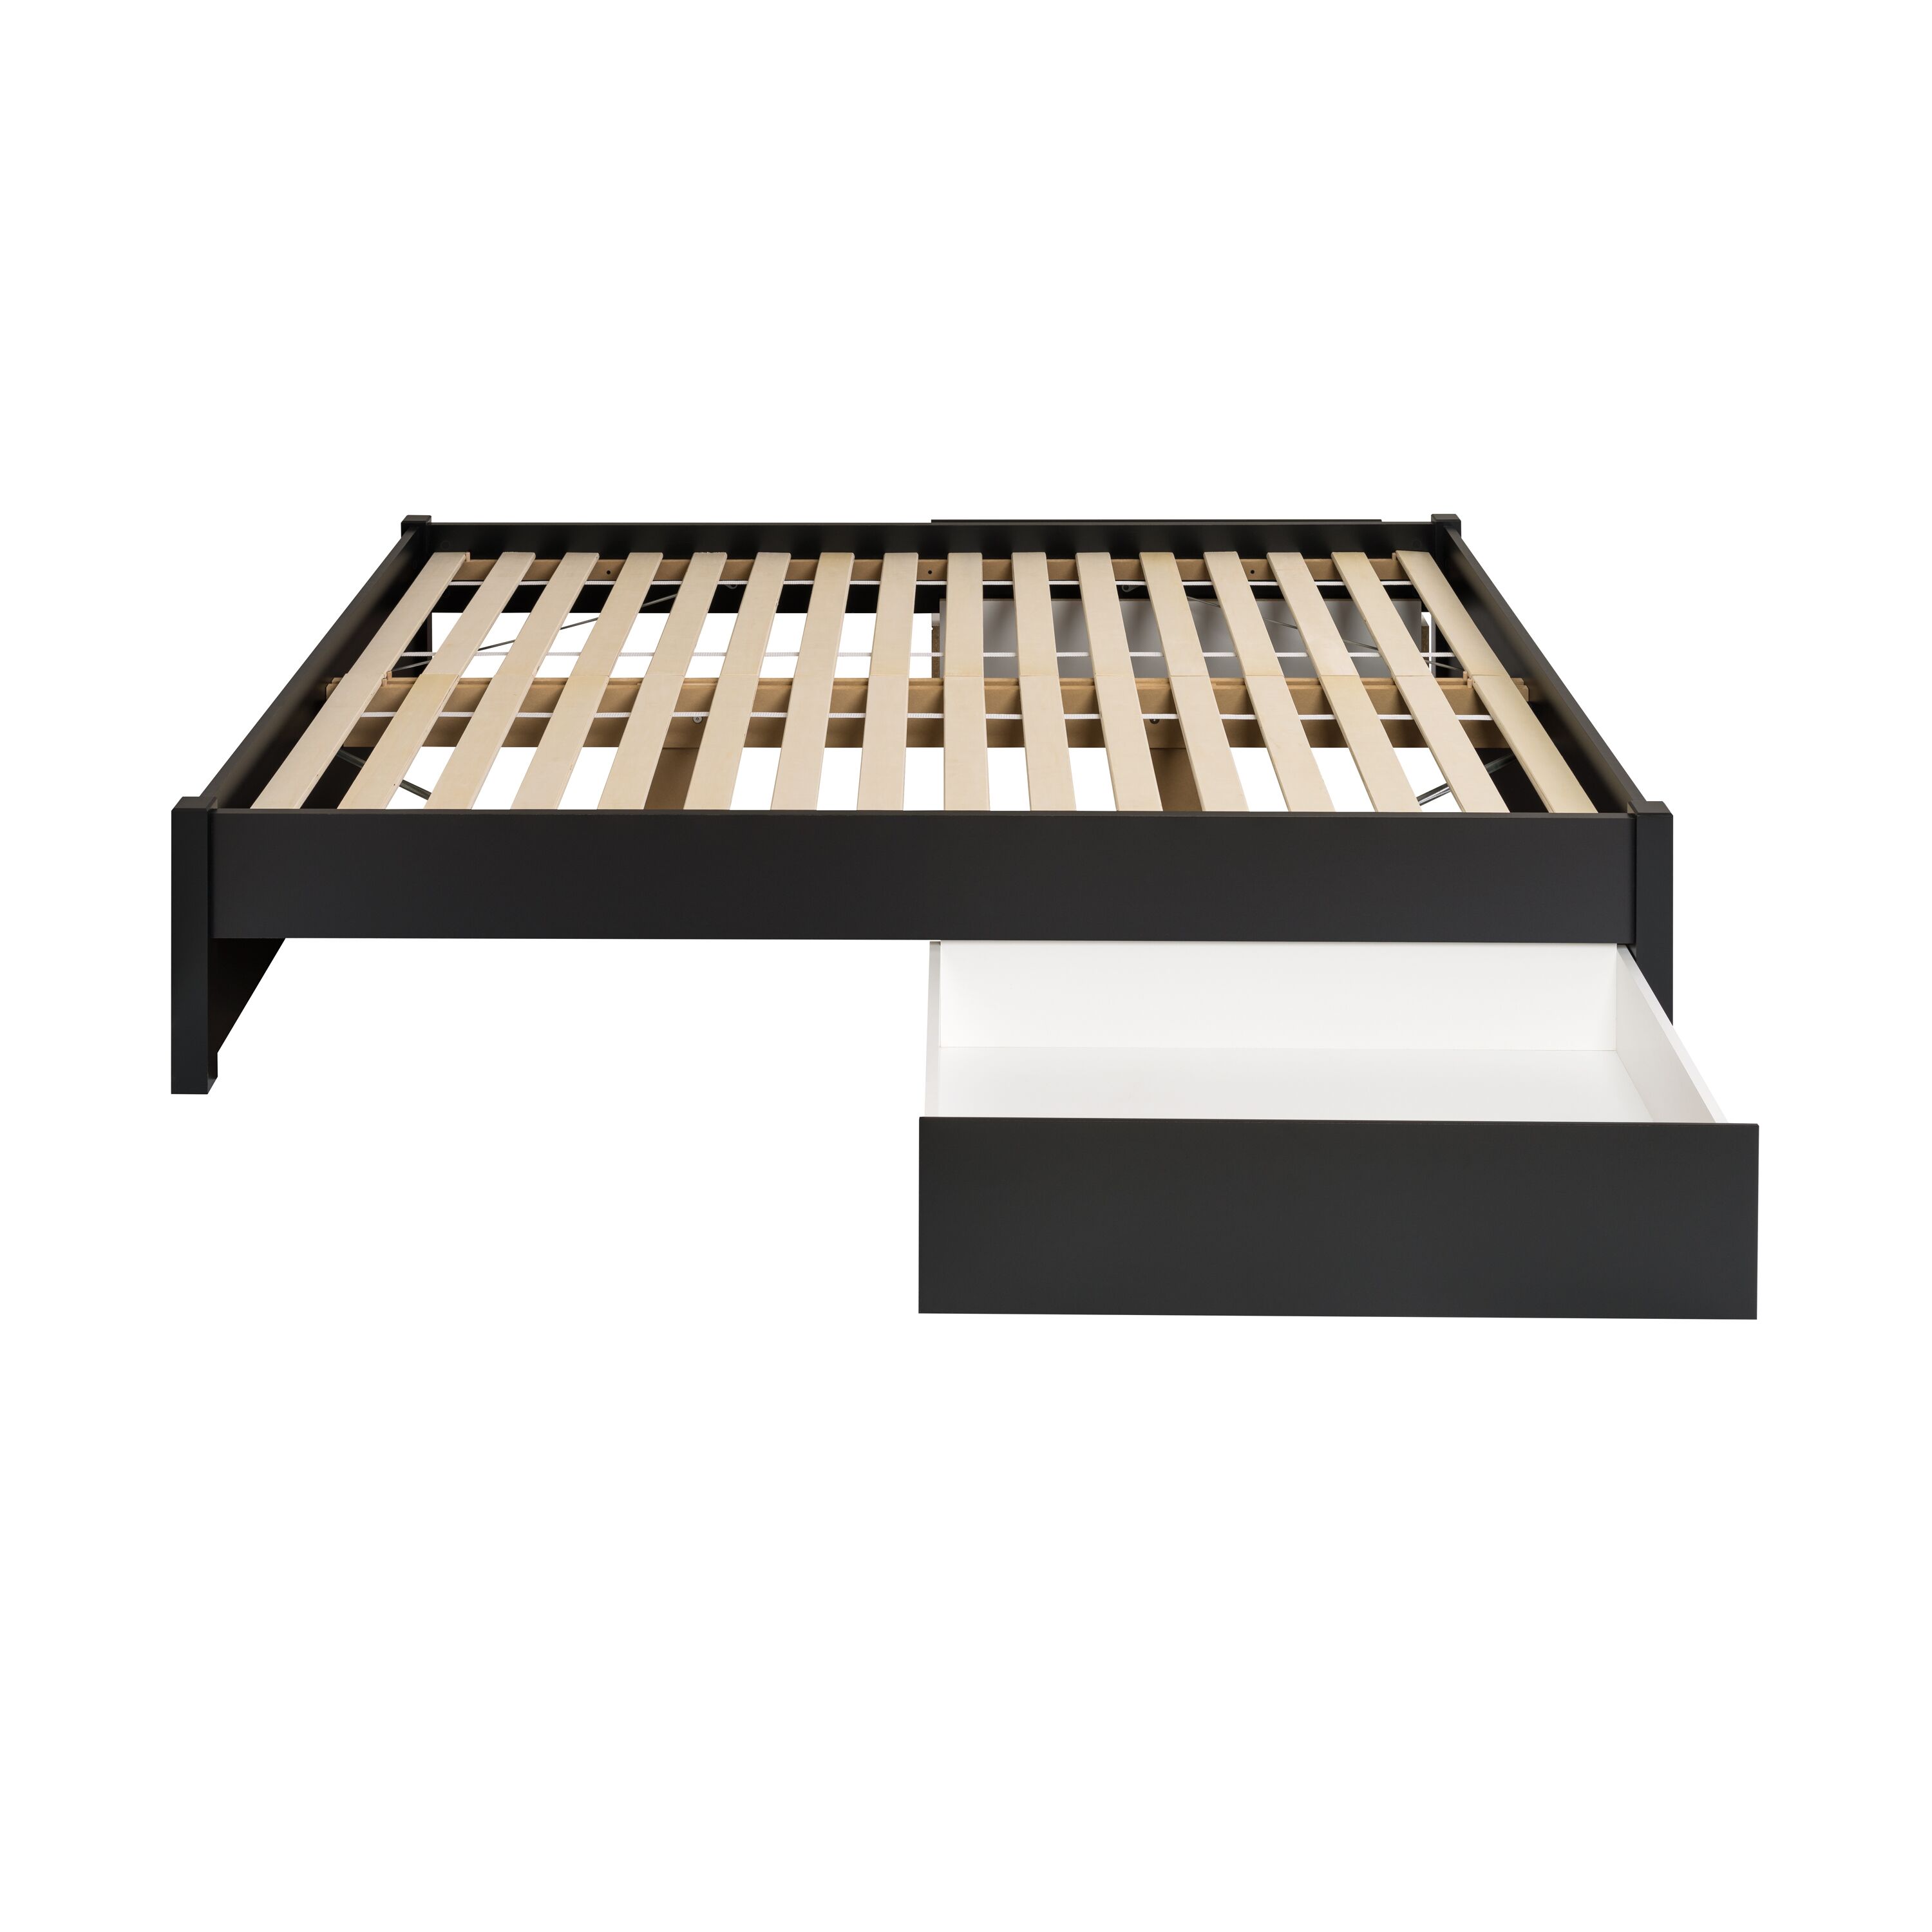 Queen Select 4-Post Black Platform Bed w/2 Drawers by Prepac